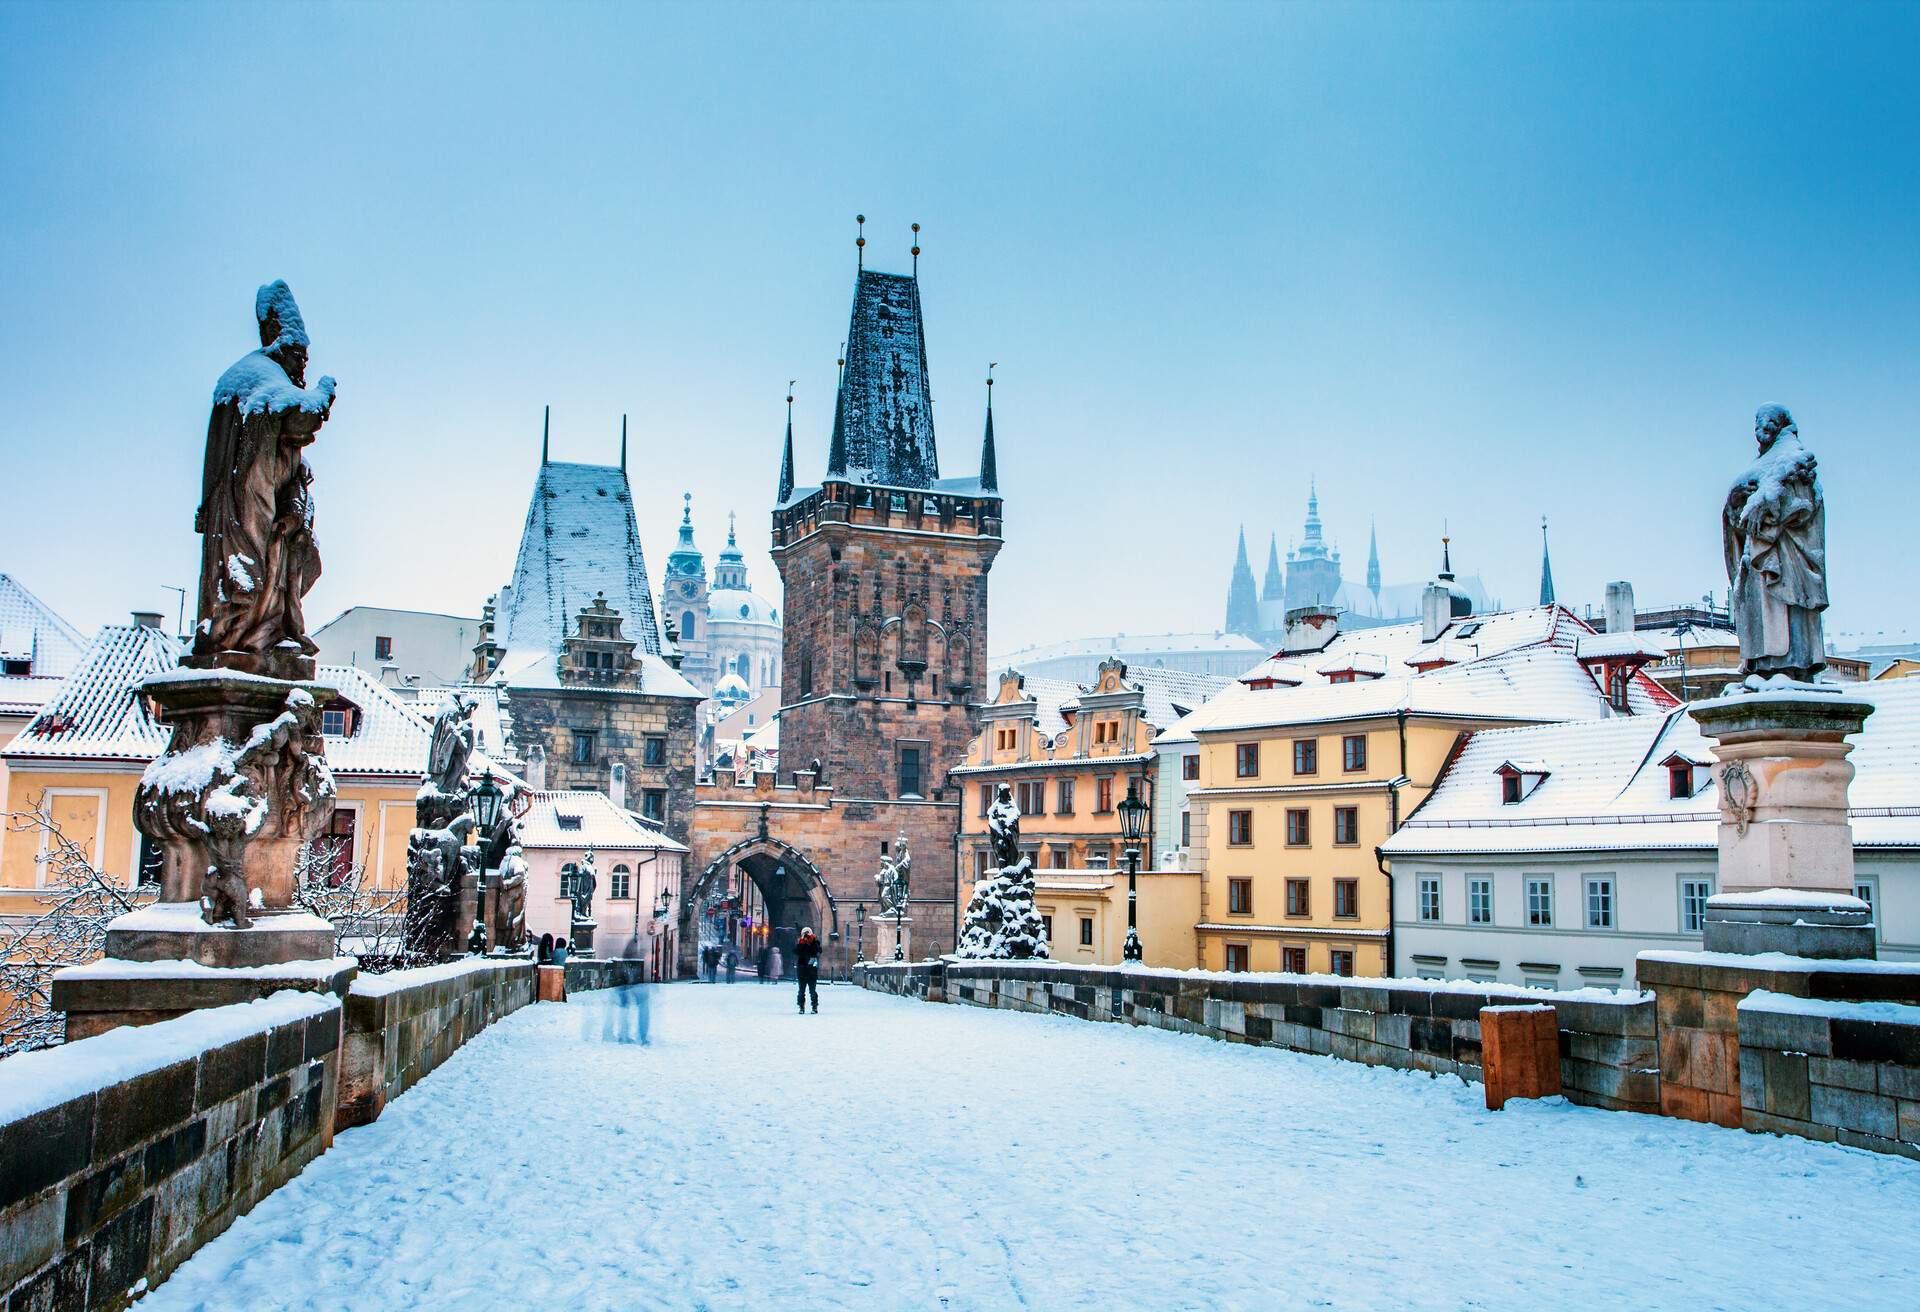 An early morning on the Charles Bridge during a snowstorm, Prague Castle is seen in background.